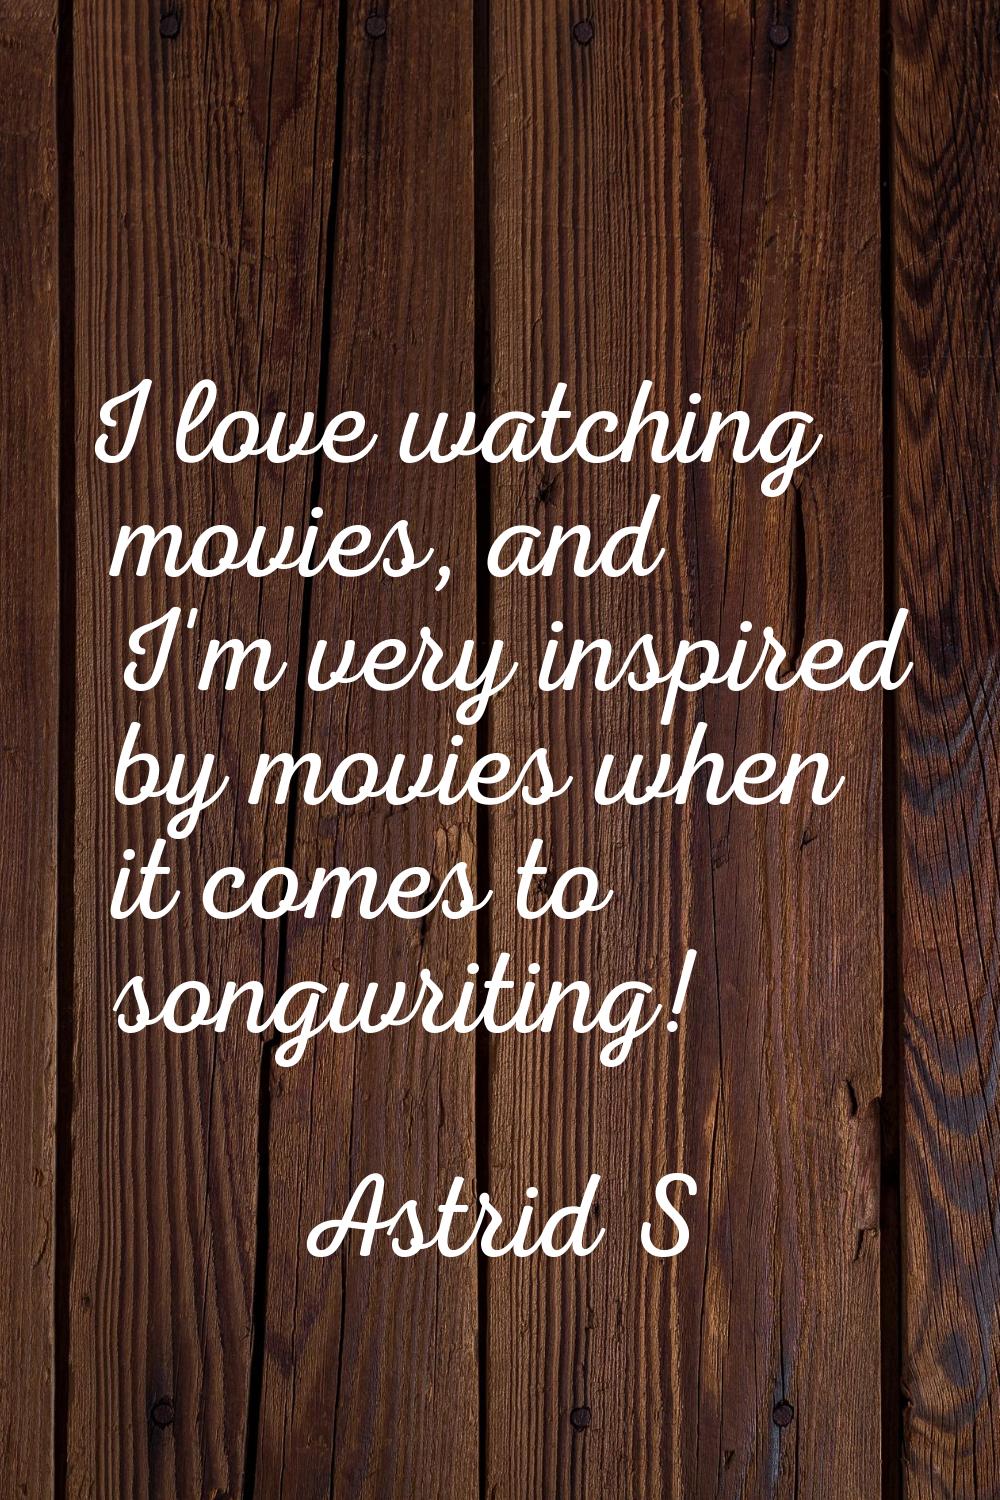 I love watching movies, and I'm very inspired by movies when it comes to songwriting!